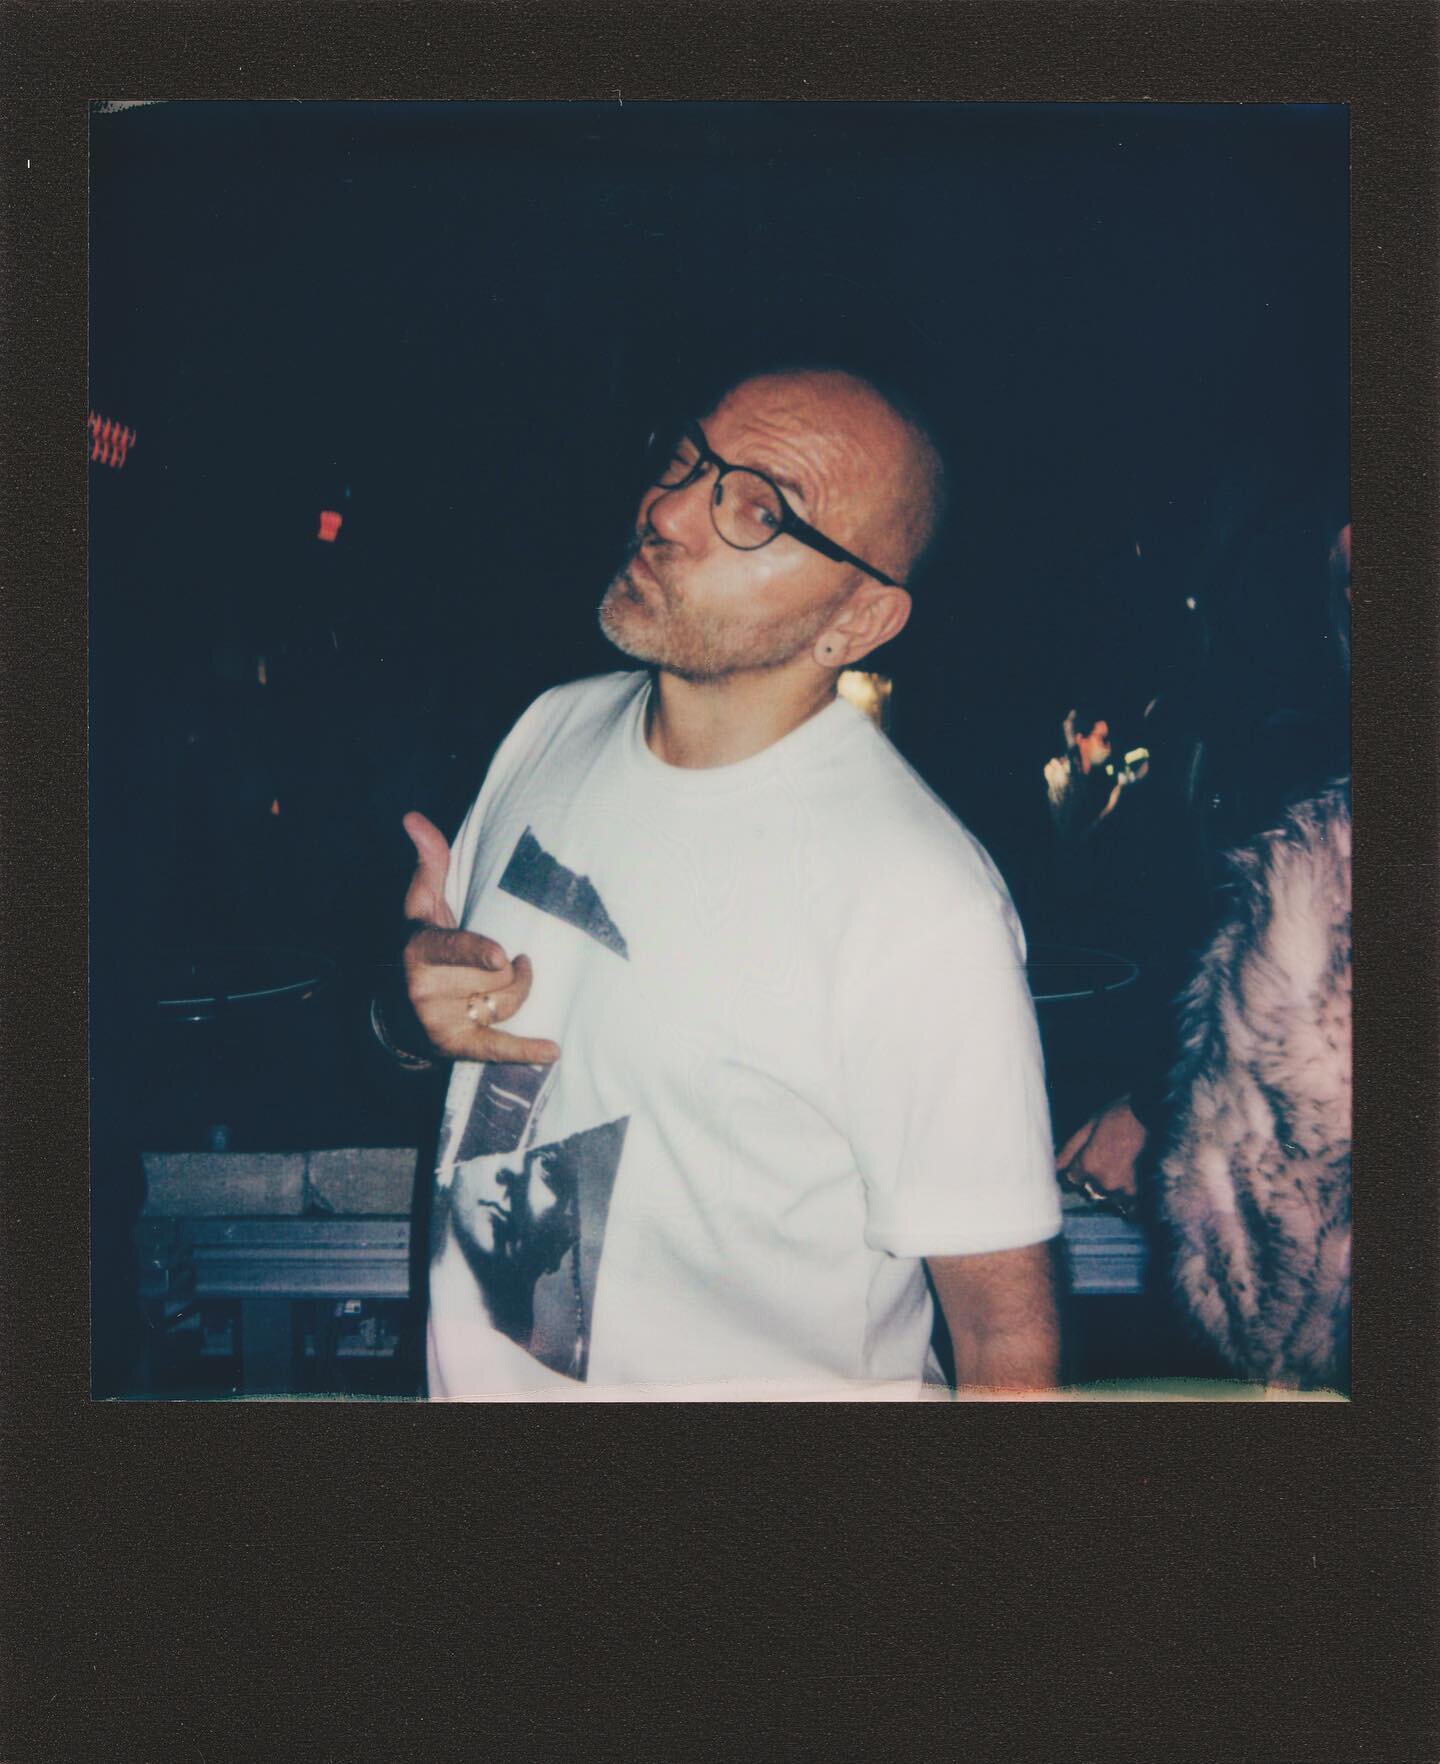 Sven V&auml;th wishes you a most triumphant Monday. #bluemonday ⁣⁣
⁣⁣
Photo from Caprice Festival 2020.⁣⁣
⁣⁣
📸: @asianprovocateur ⁣⁣